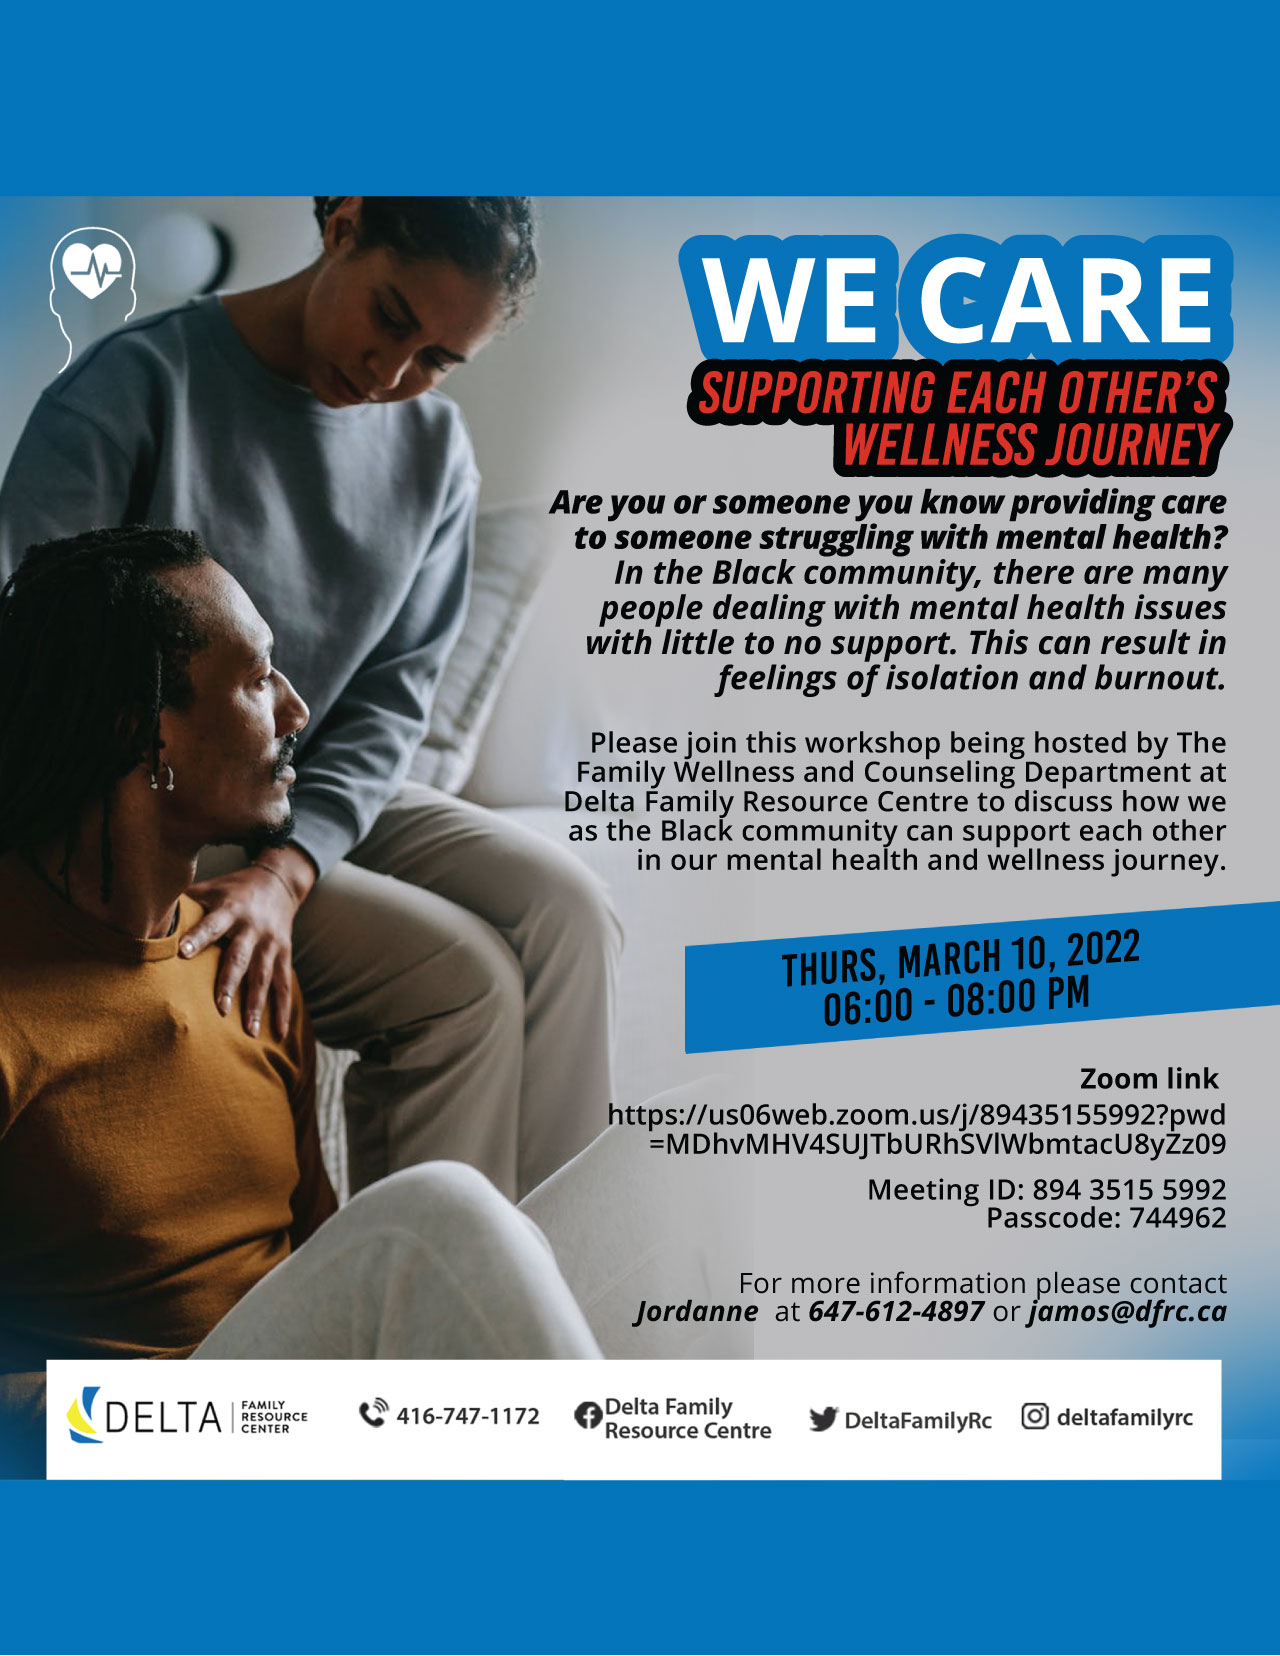 We Care: Supporting Each Other’s Wellness Journey